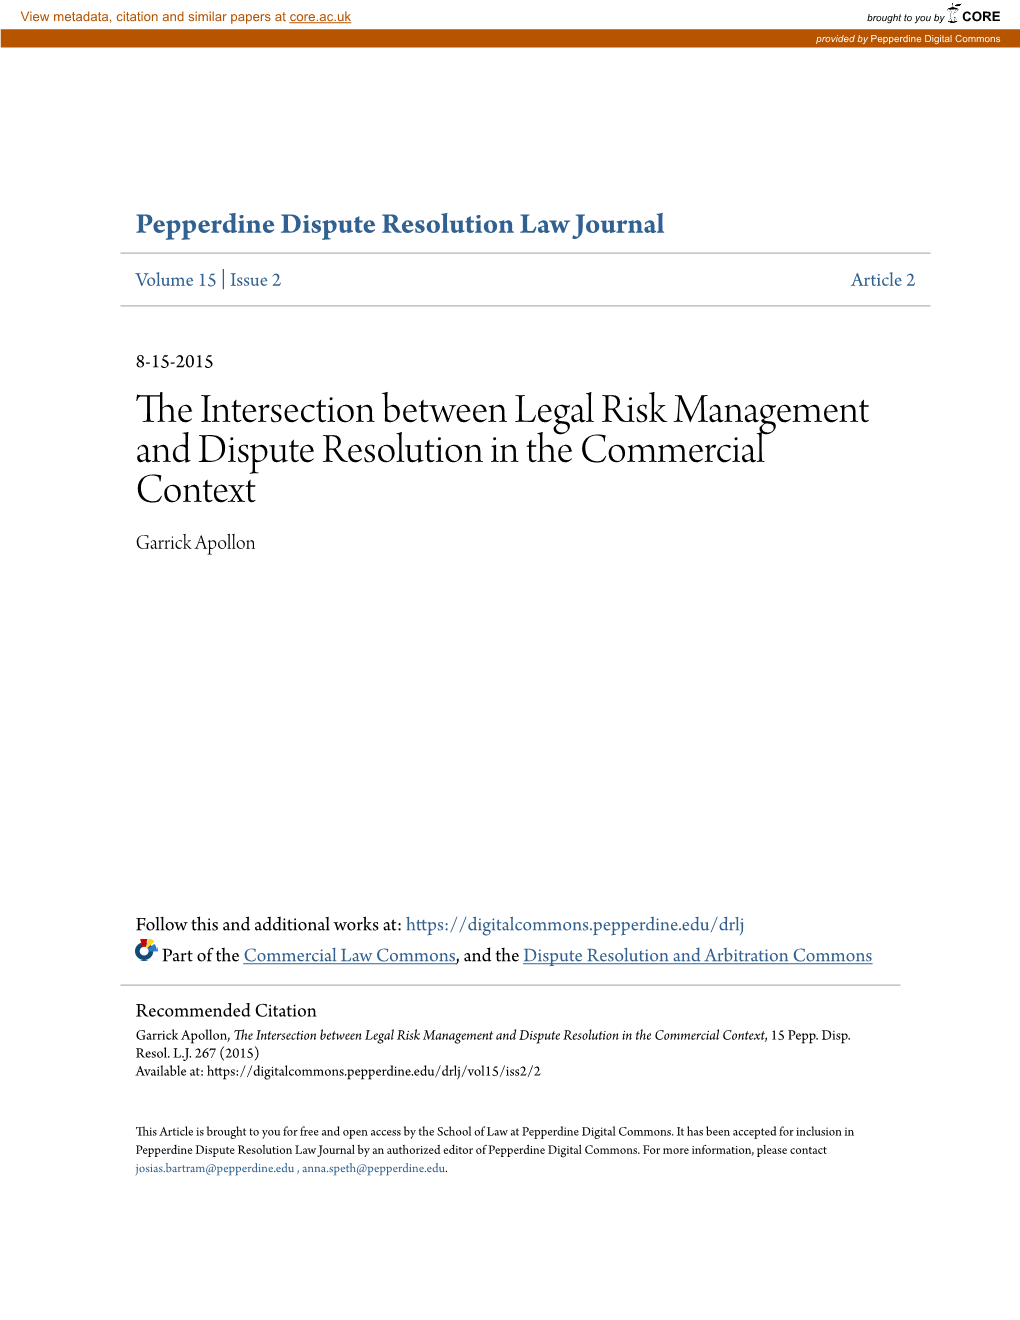 The Intersection Between Legal Risk Management and Dispute Resolution in the Commercial Context, 15 Pepp